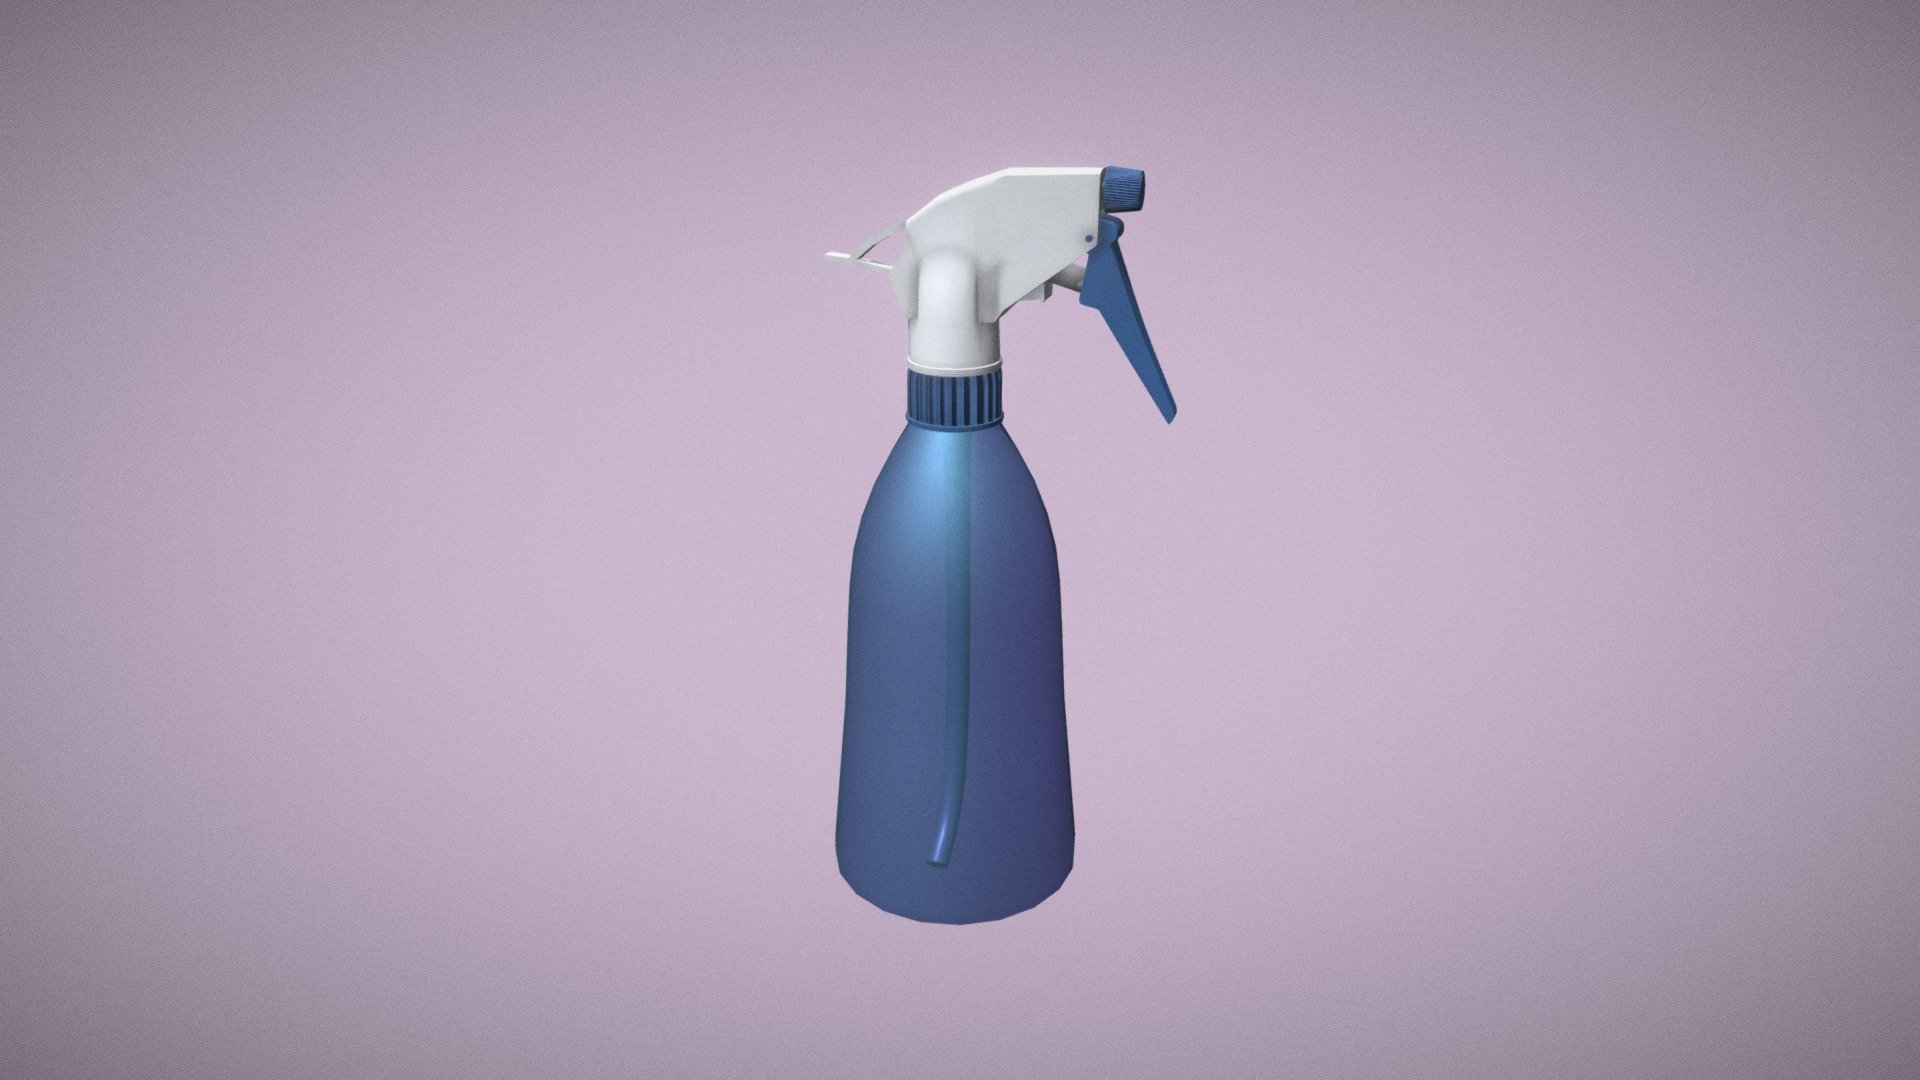 A water bottle I modeled for a hair salon 3d scene I was making. Modeled in Maya, textured in Substance Painter 3d model